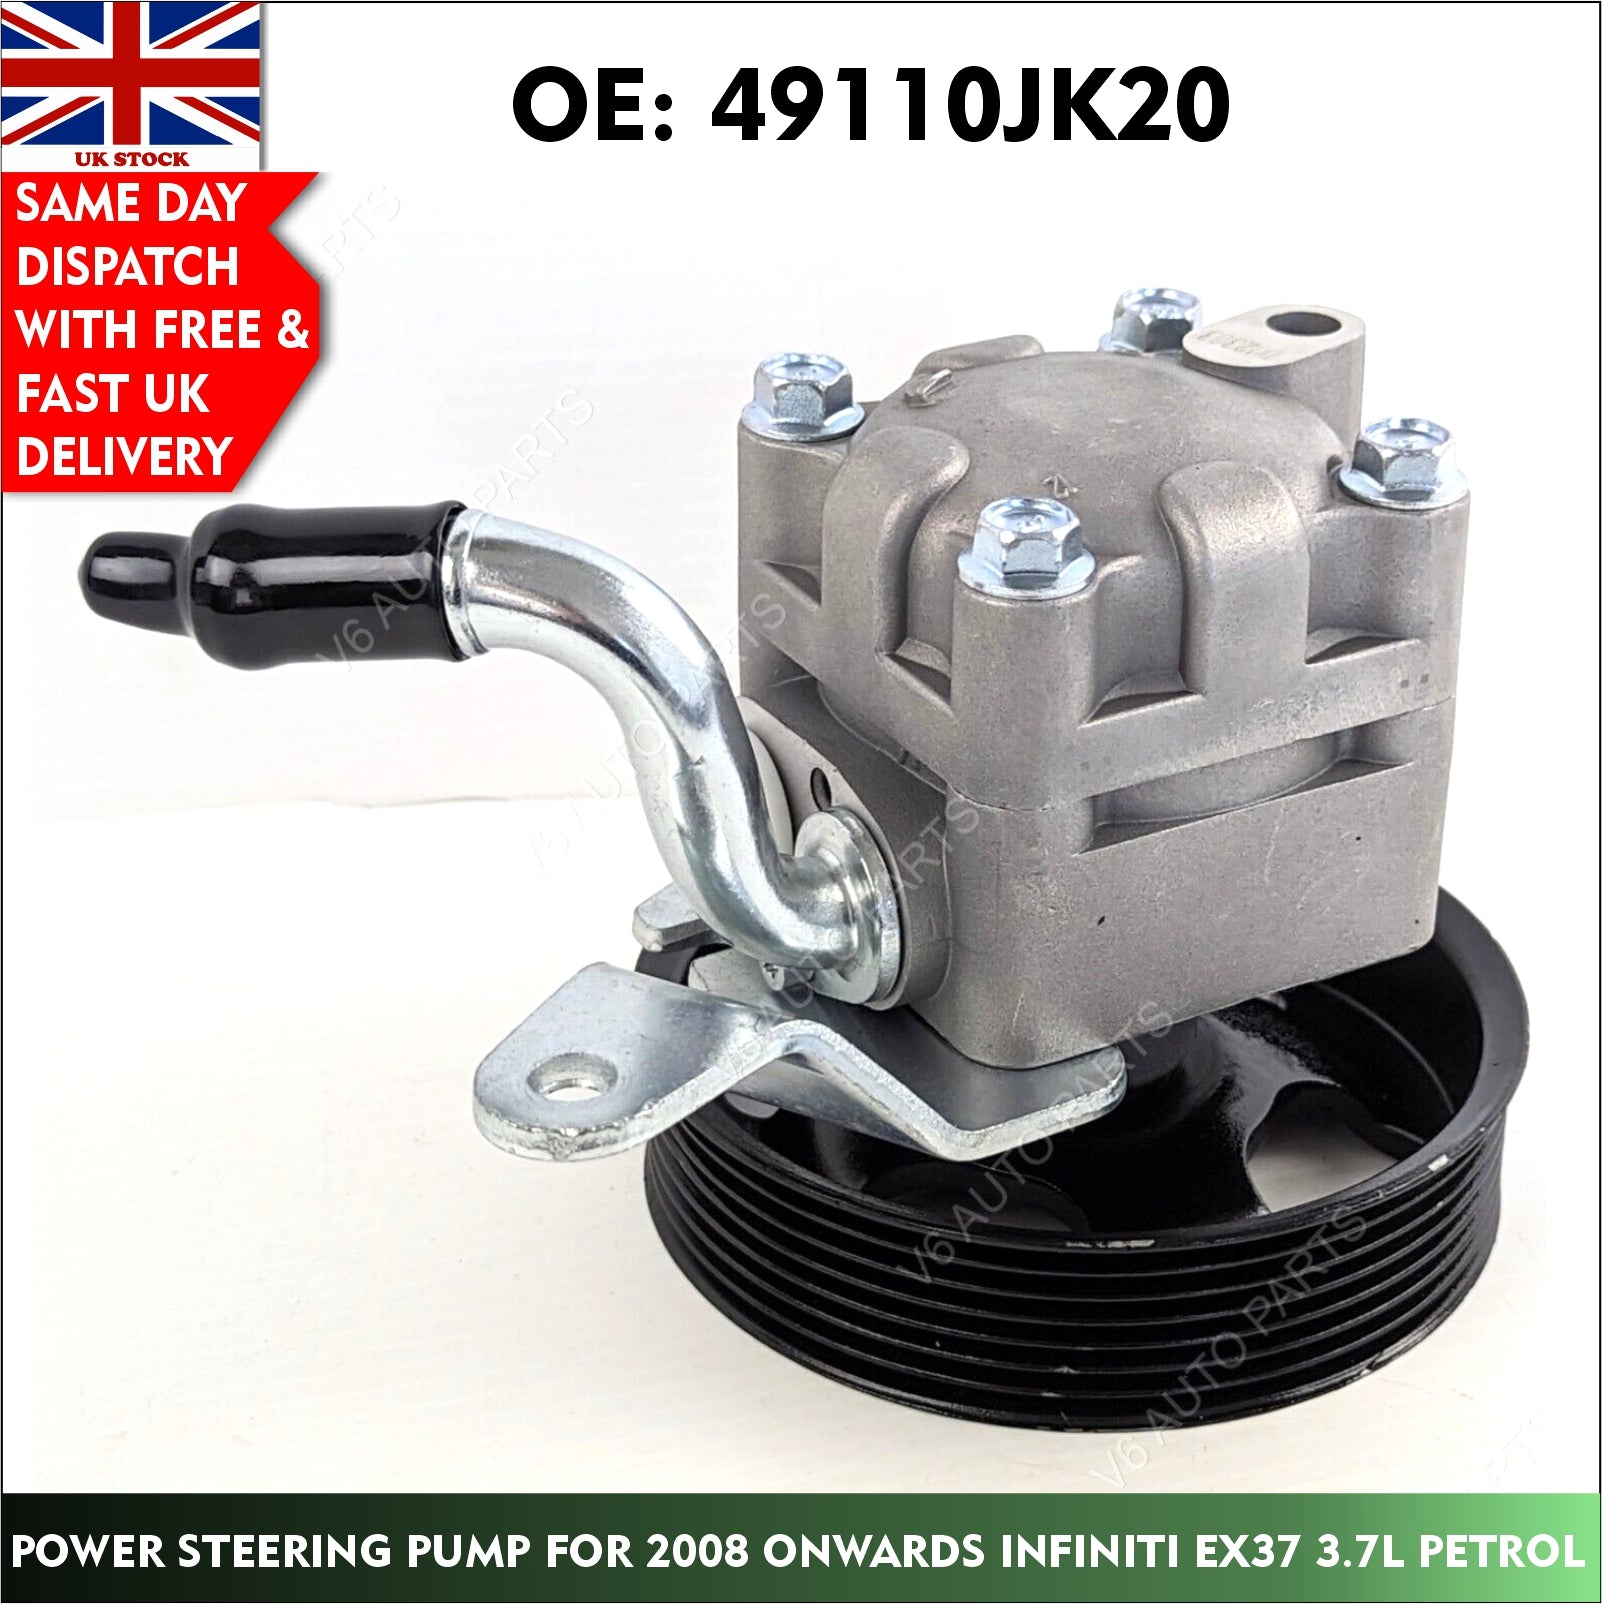 Power Steering Pump For 2008 Onwards Infiniti Nissan Skyline Crossover AWD 2WD